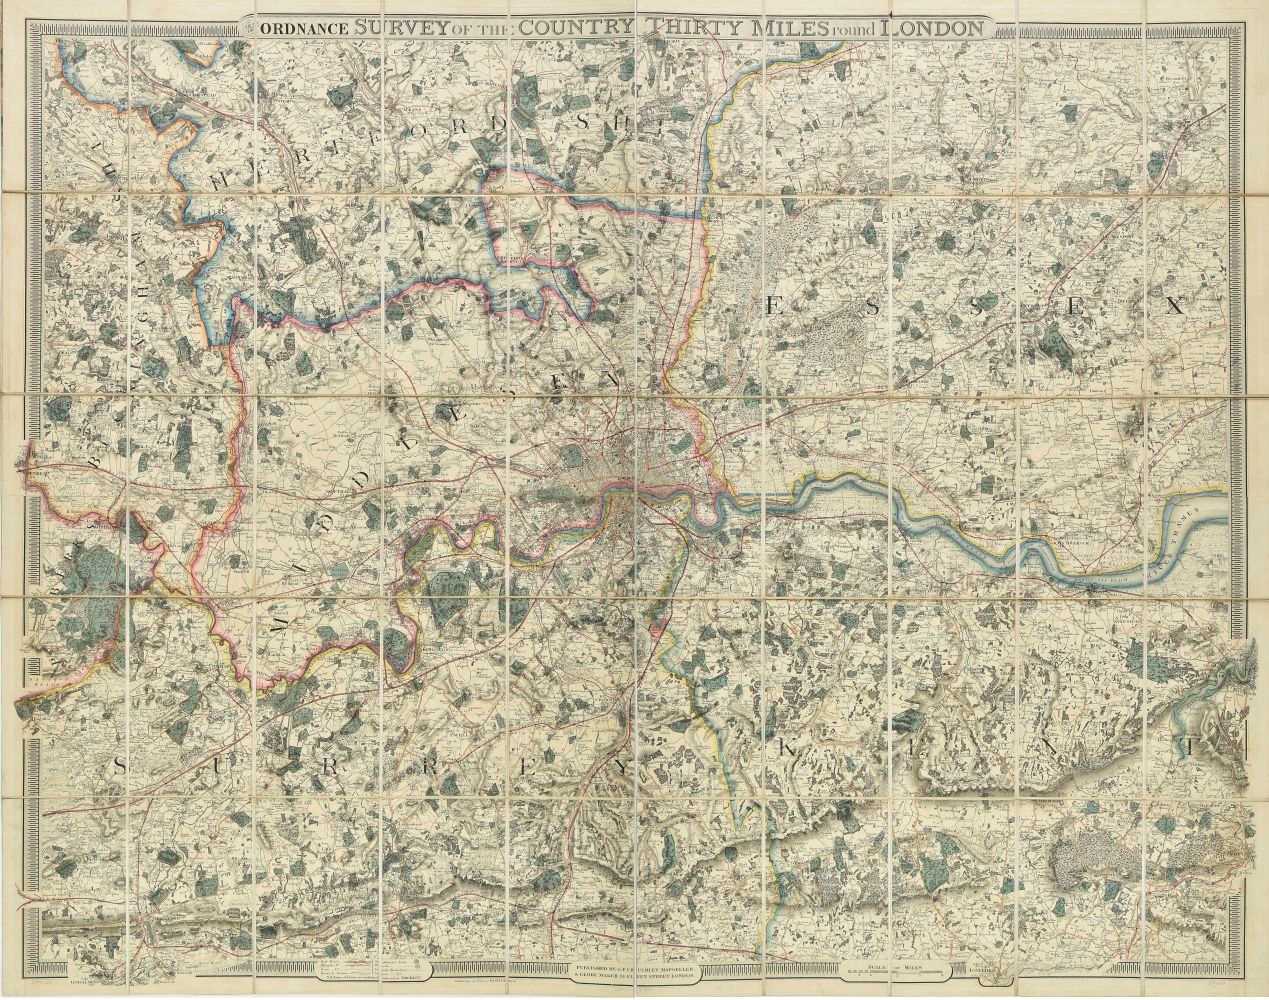 Lot 51 - London, From the Ordnance Survey, Thirty miles round London, 1855